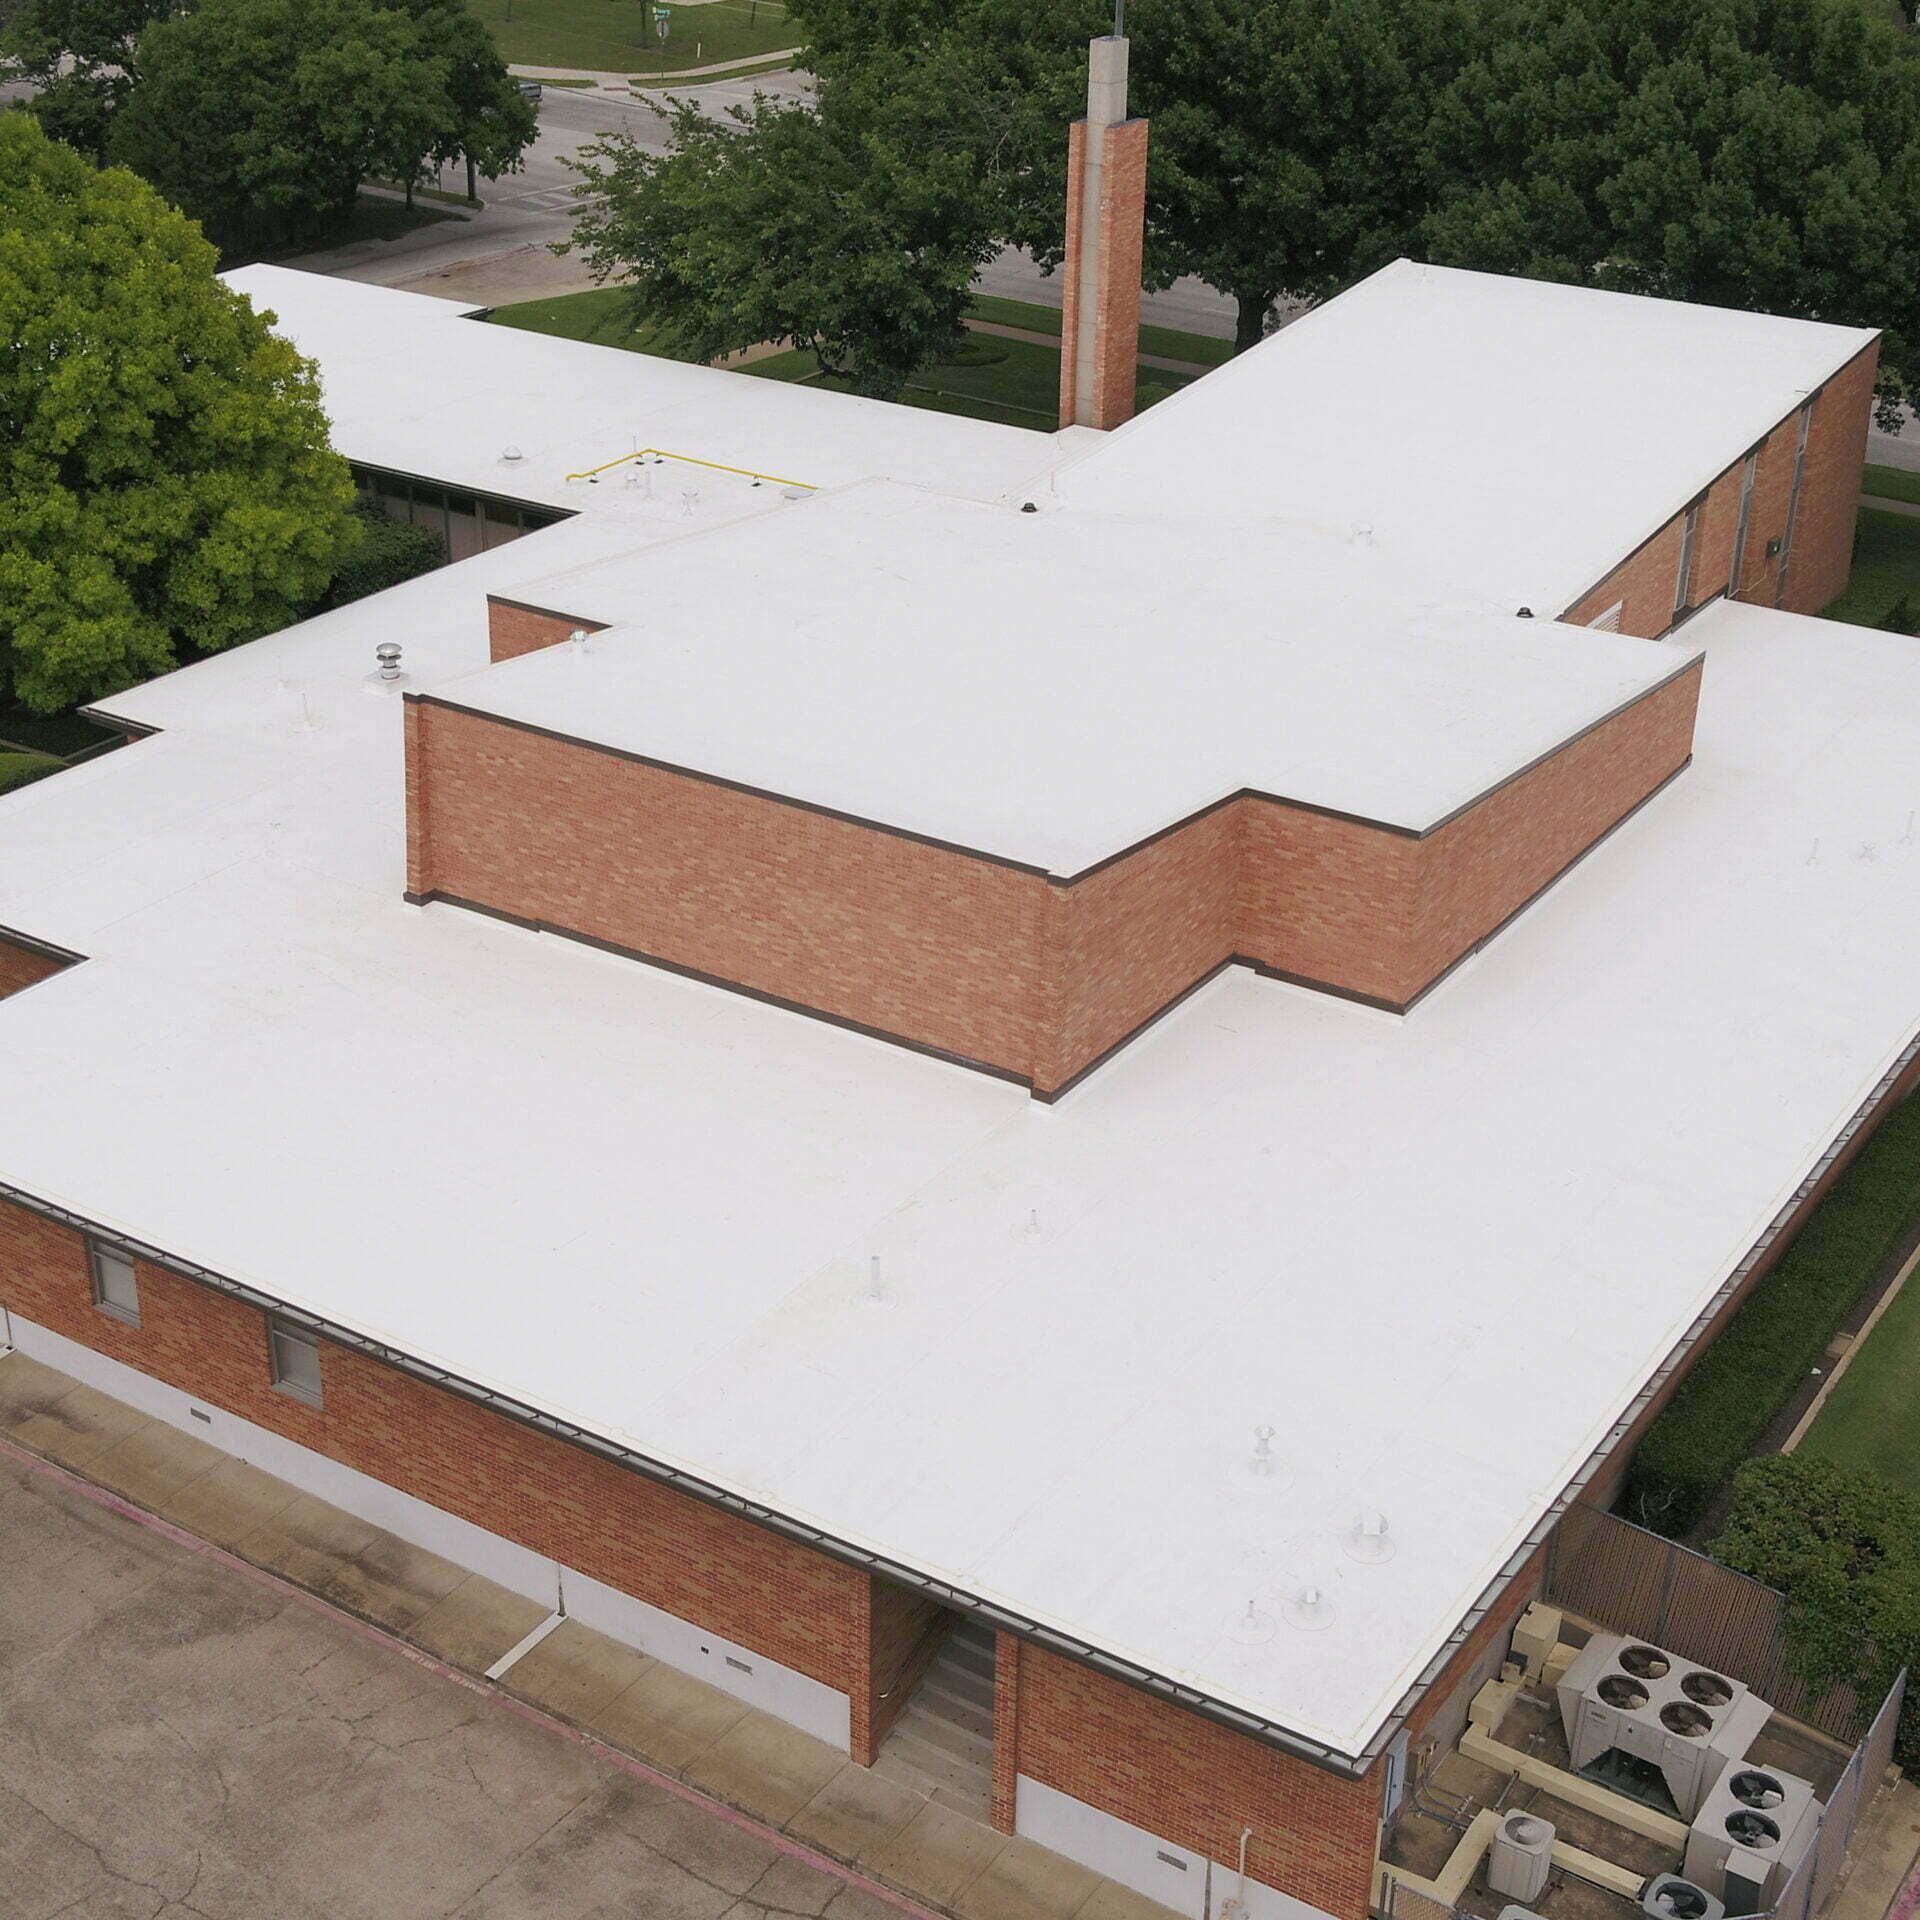 Image shot at Church of Latter Day Saints, Completed Drone Pictures, Grand Prairie, Texas, May 14, 2021, Jeffrey Parr/Supreme Roofing